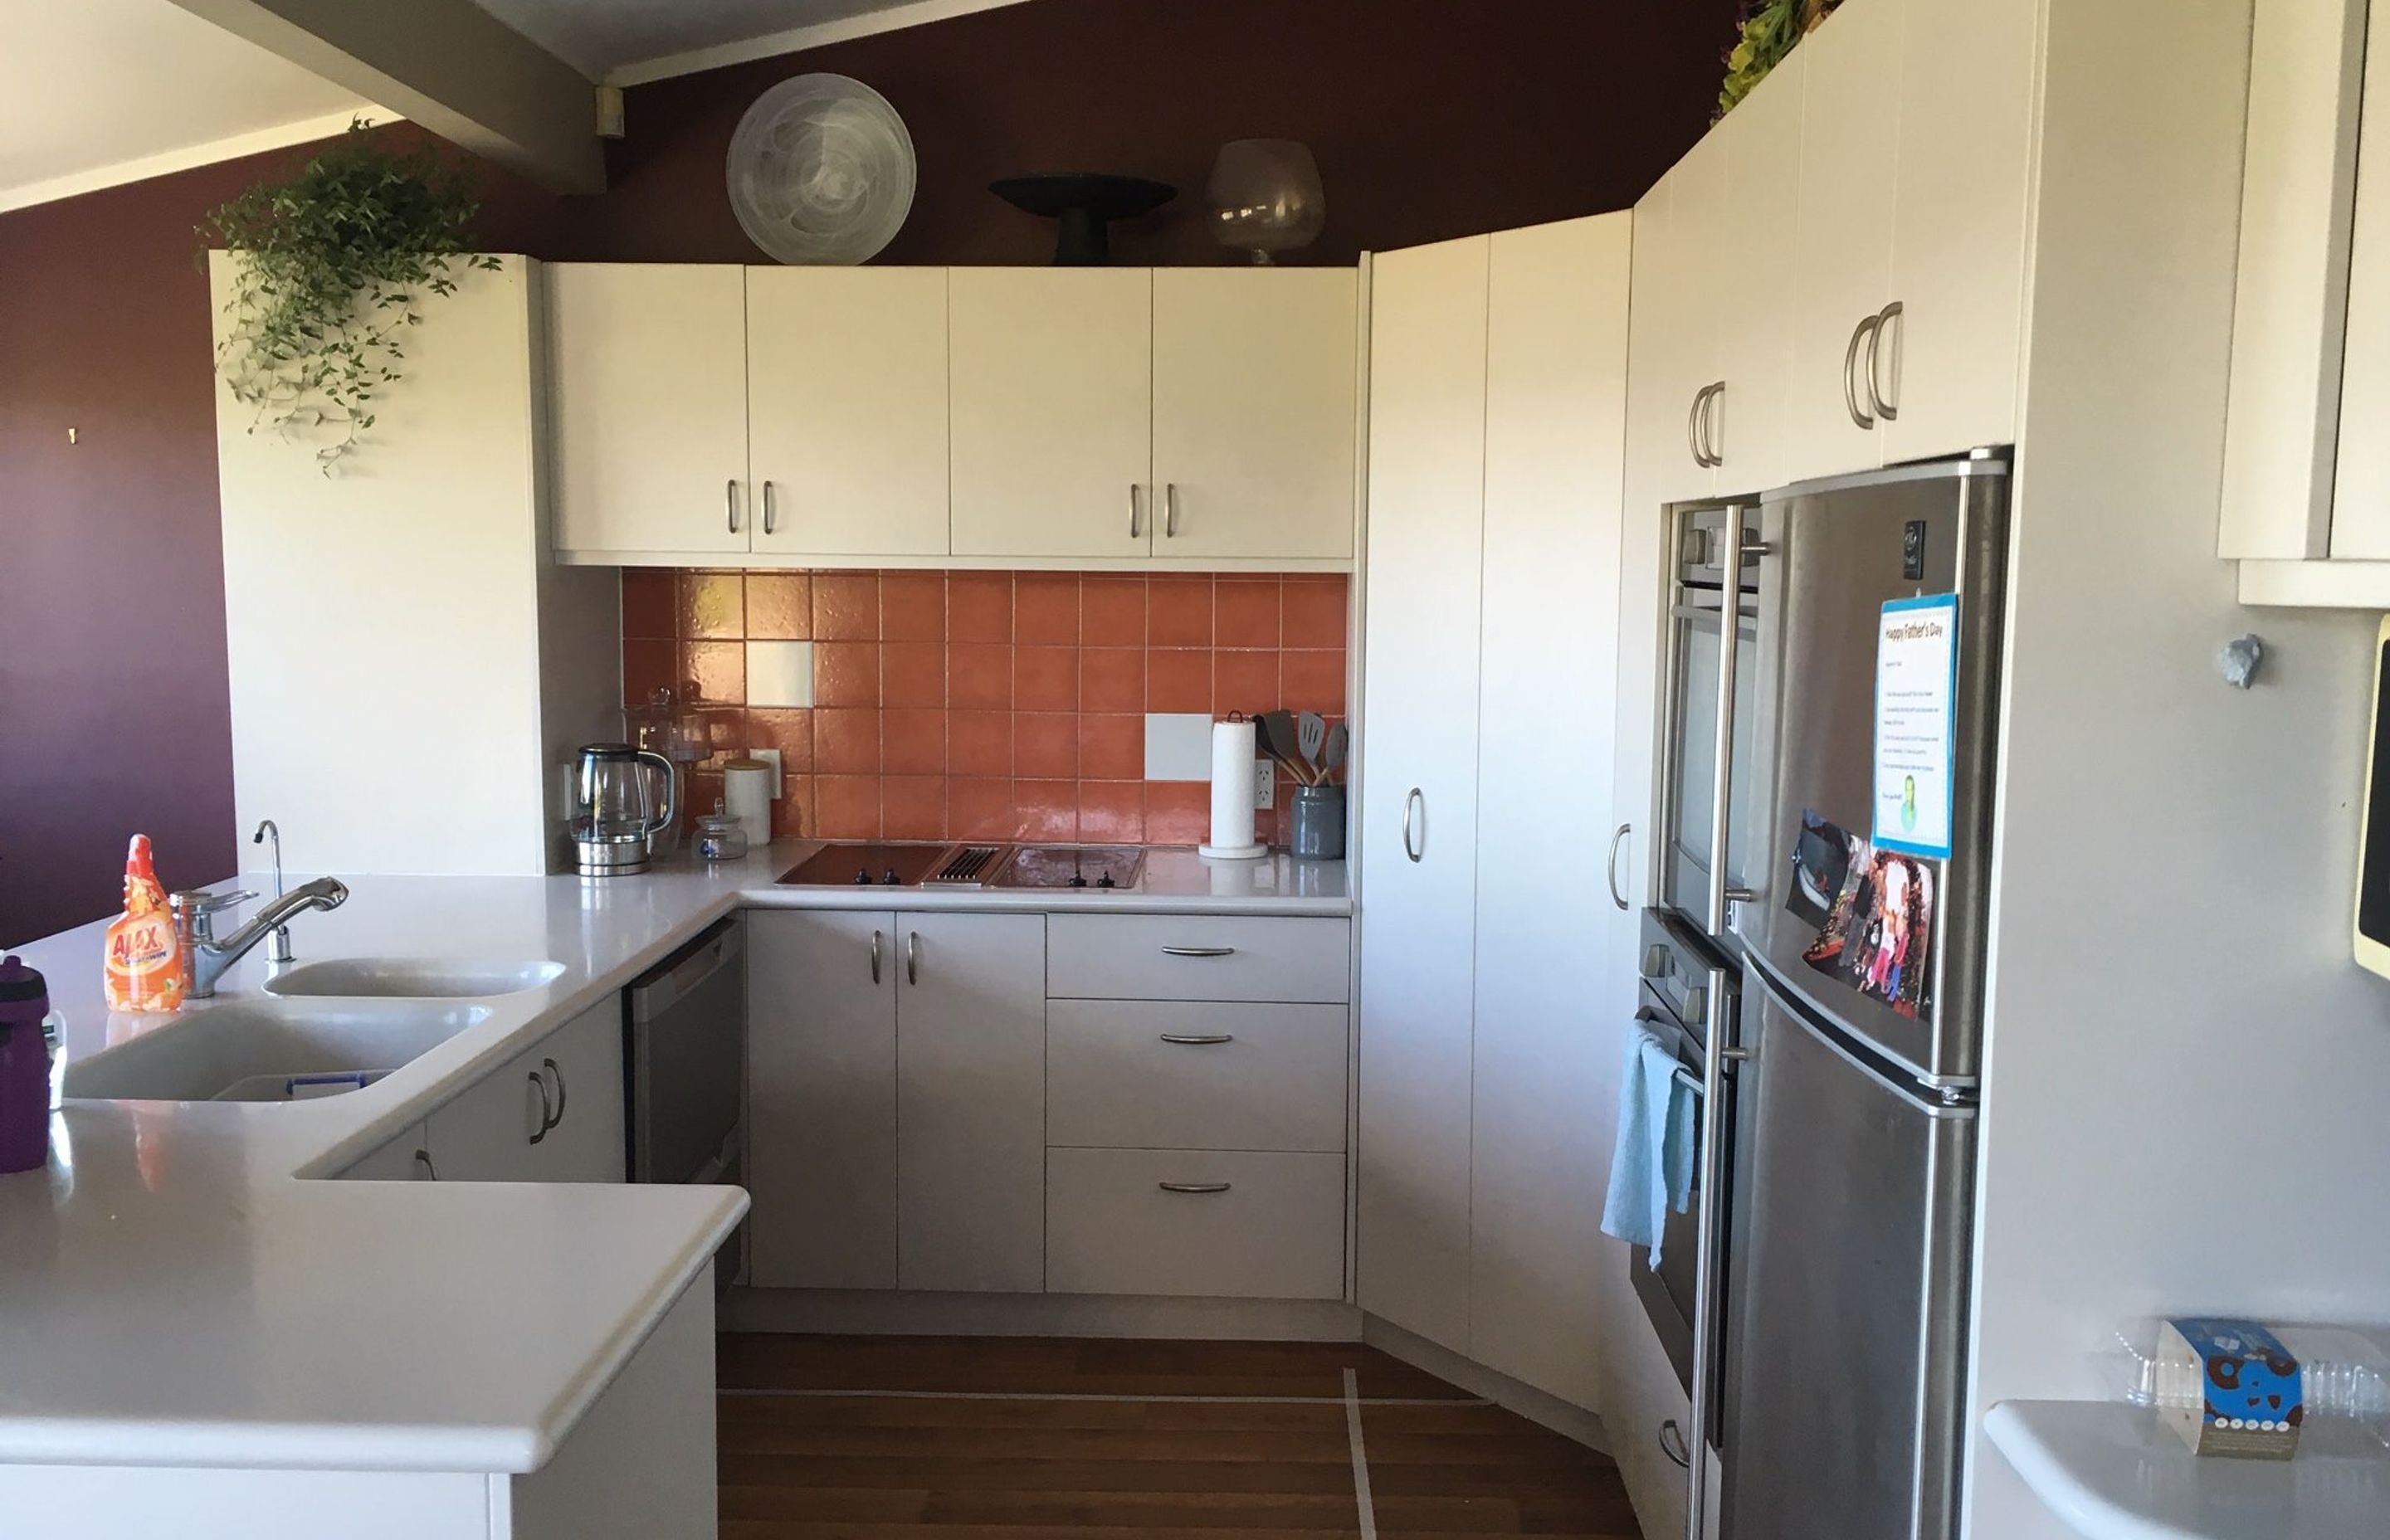 The old kitchen was in much need of an upgrade for the family that loved to entertain
